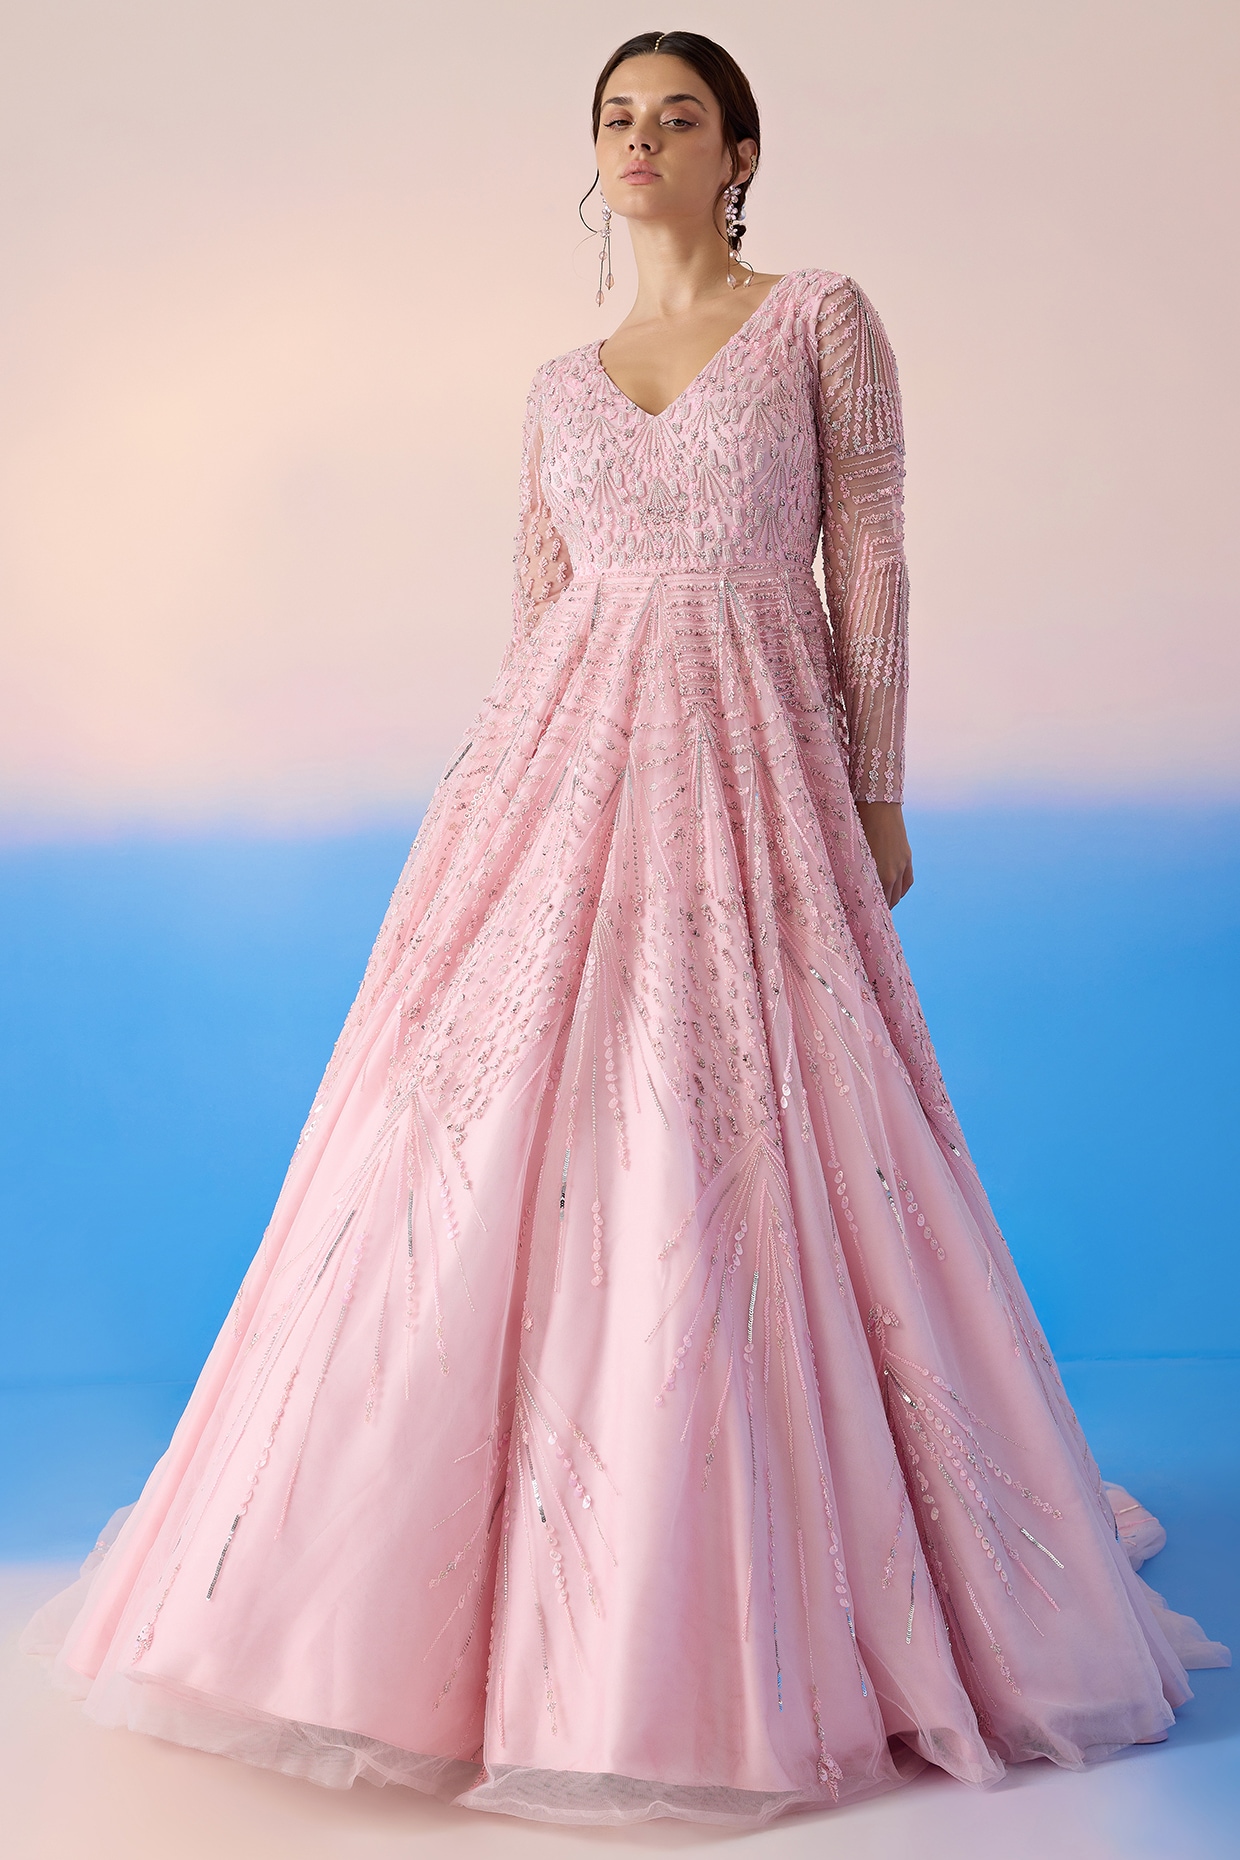 Awesome Chiffon Engagement Floor Length Gown